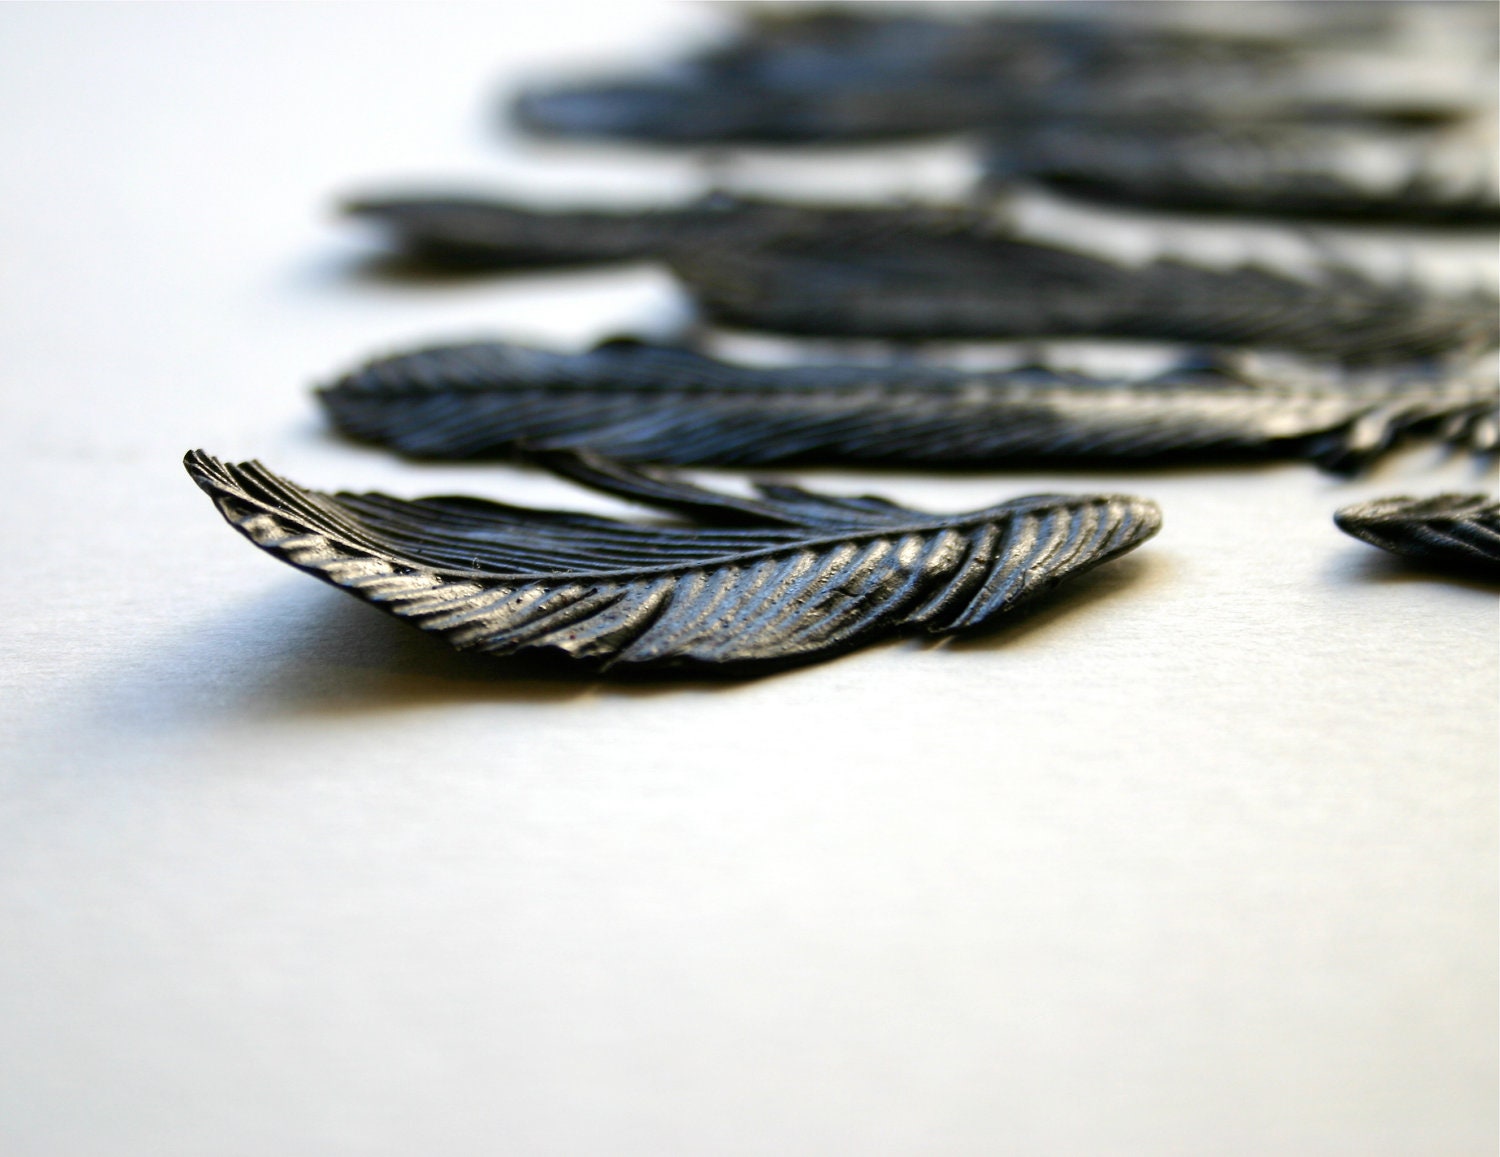 Edible Black Bird Feathers -Chocolate Flavor -12 -Confection Embellishment - andiespecialtysweets